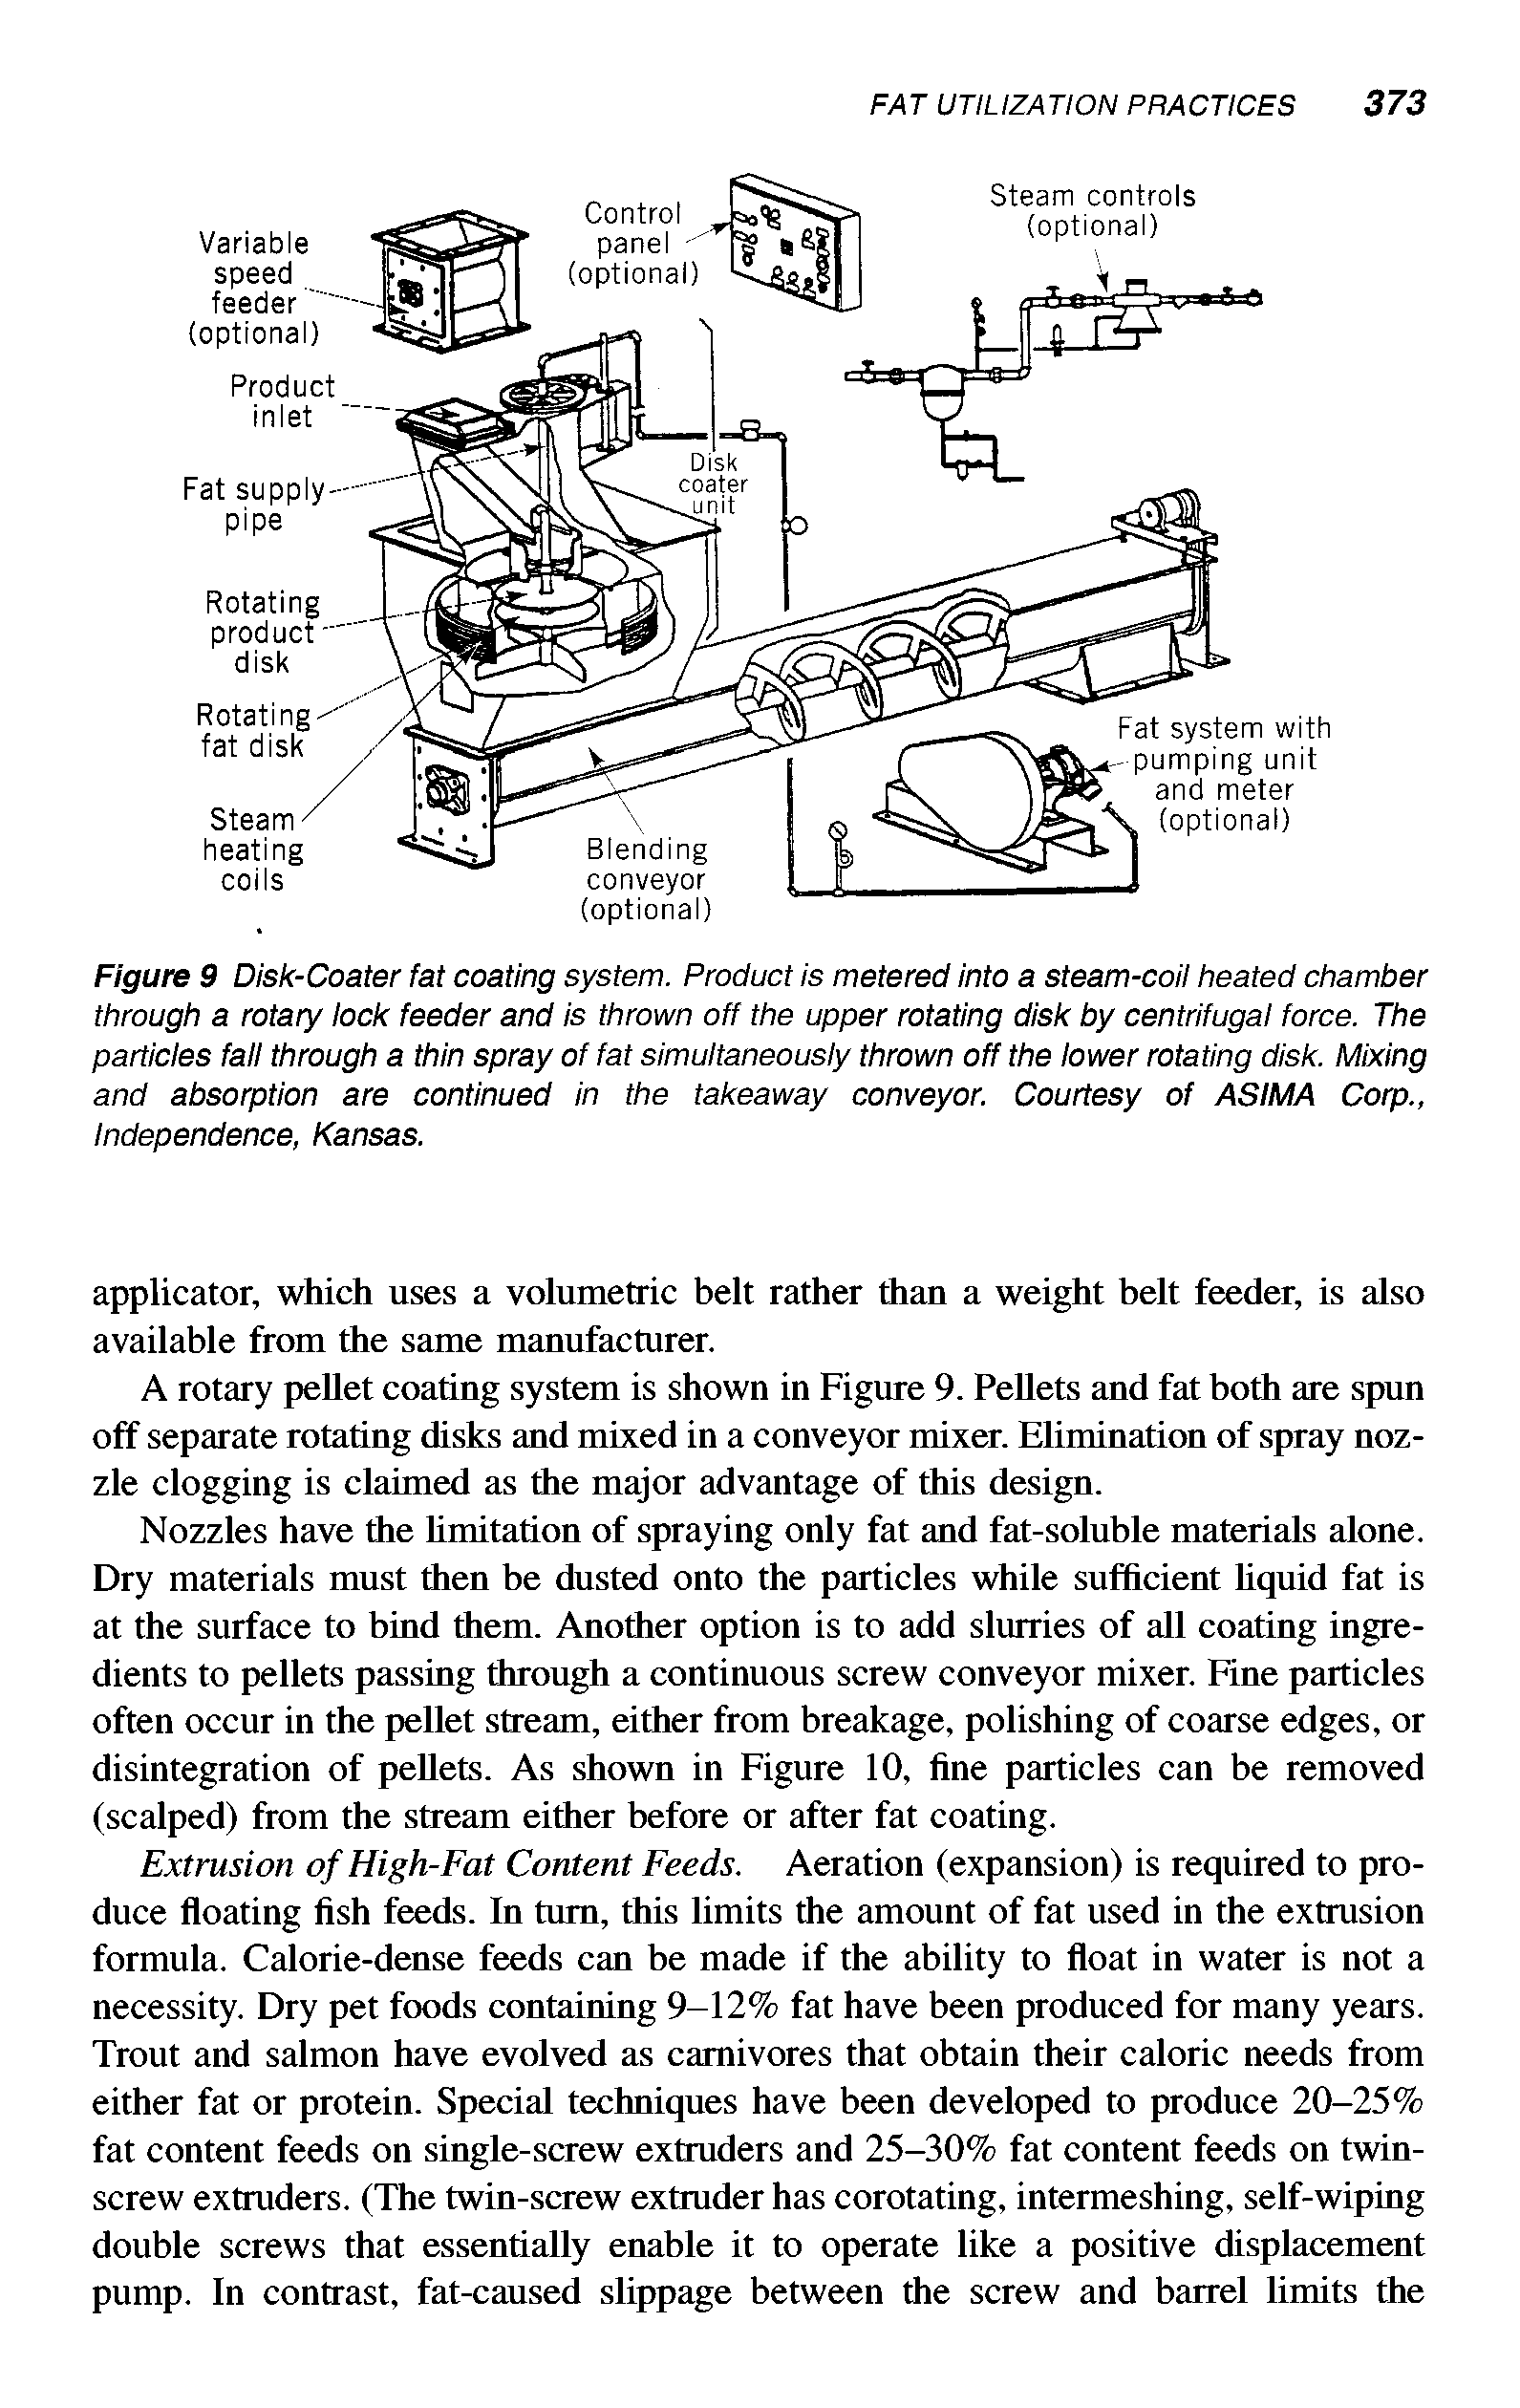 Figure 9 Disk-Coater fat coating system. Product is metered into a steam-coii heated chamber through a rotary iock feeder and is thrown off the upper rotating disk by centrifugai force. The particies faii through a thin spray of fat simuitaneousiy thrown off the tower rotating disk. Mixing and absorption are continued in the takeaway conveyor. Courtesy of ASIMA Corp., independence, Kansas.